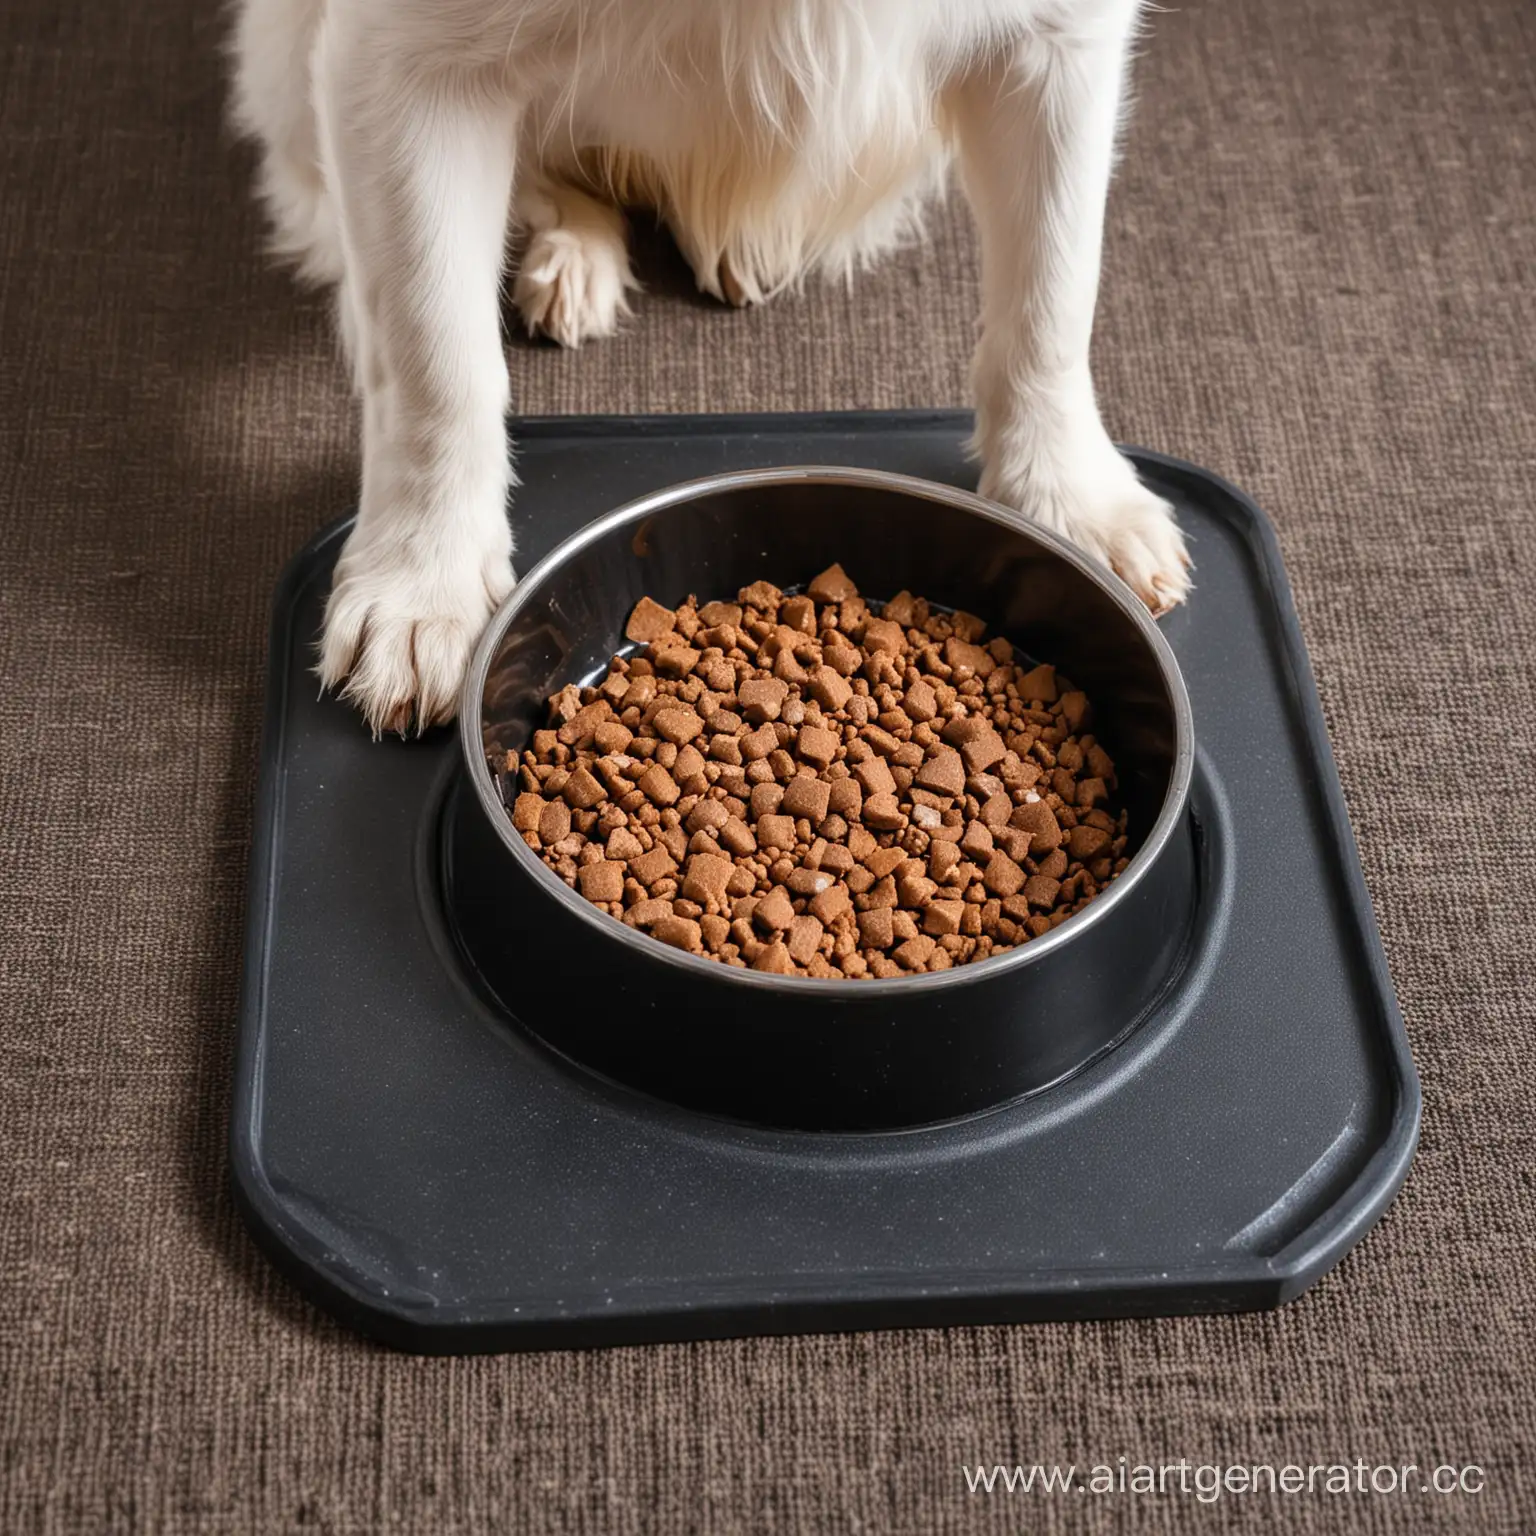 Dog-Eating-from-Metal-Bowl-on-Rubber-Mat